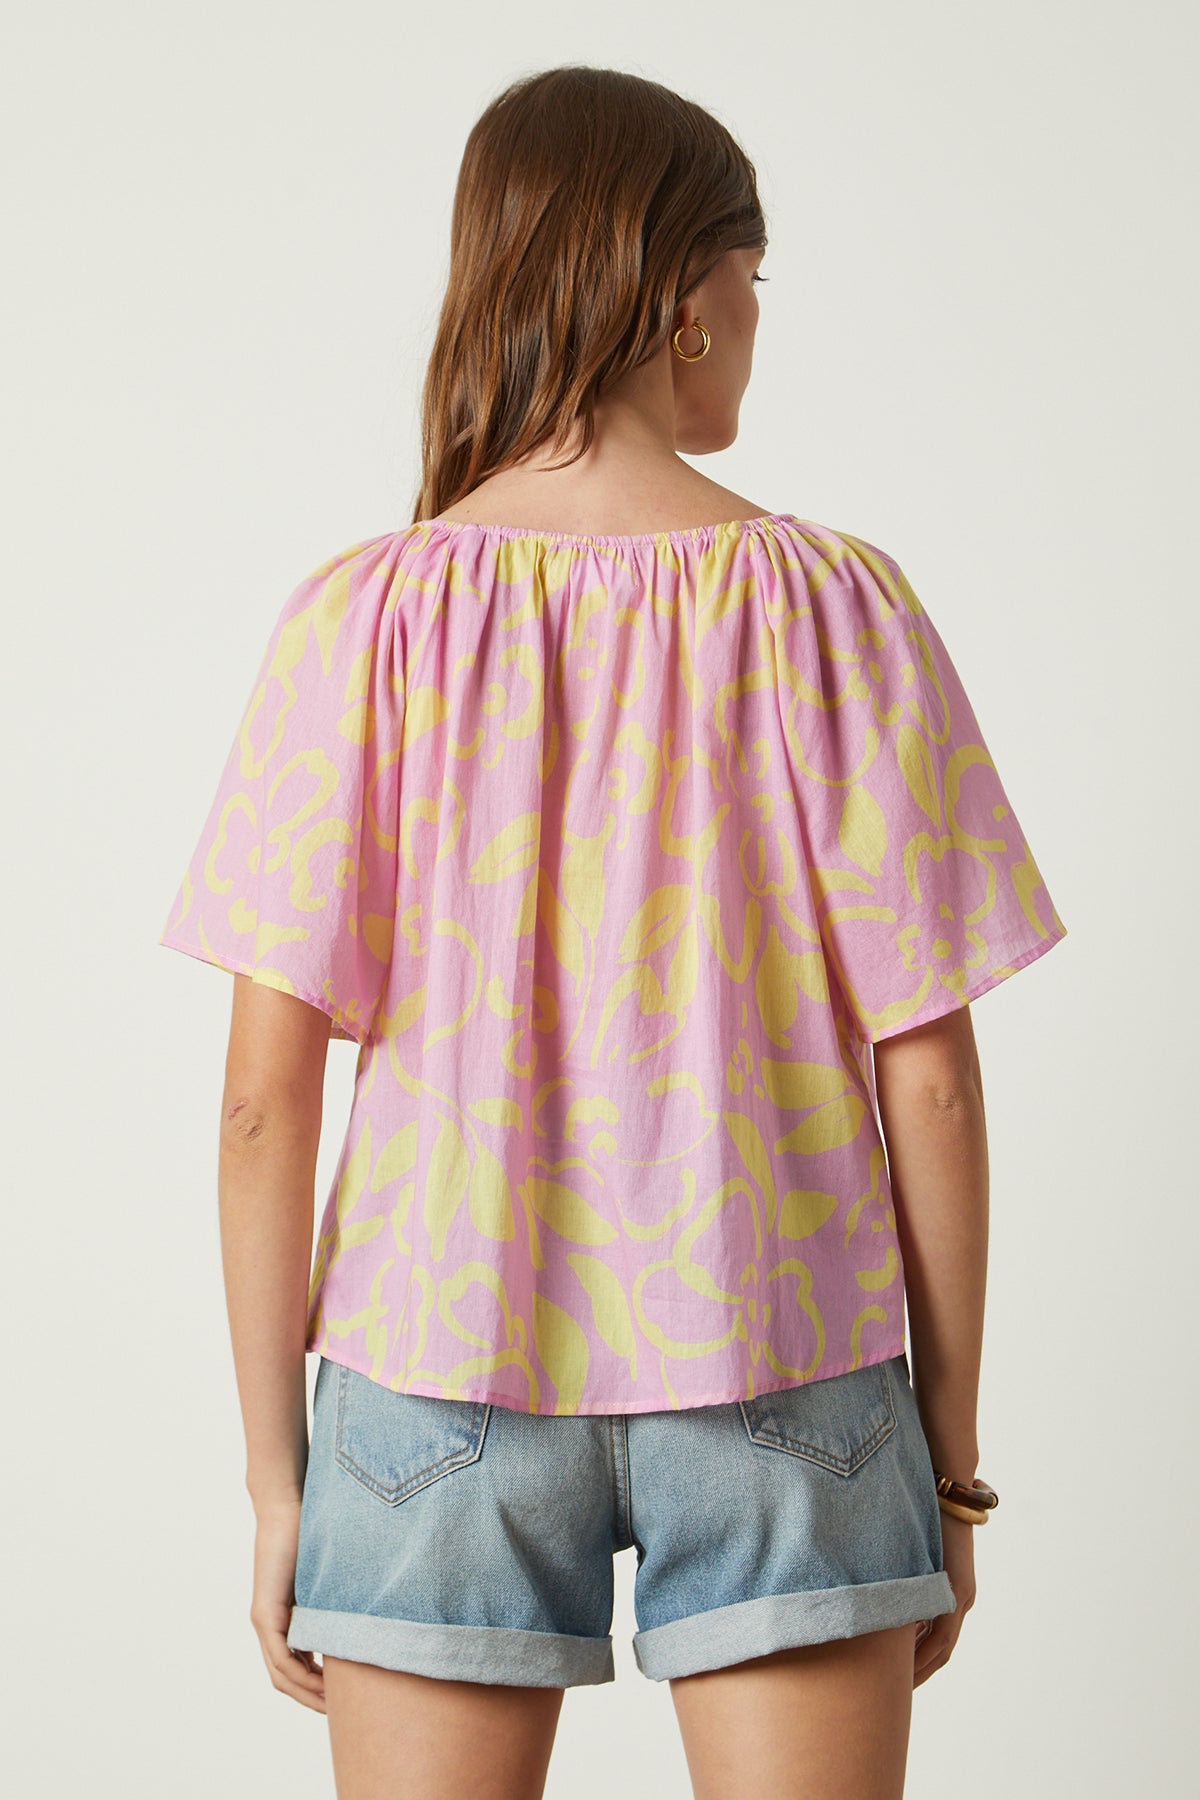 Liliana Top in print with pink and yellow back-25954331427009